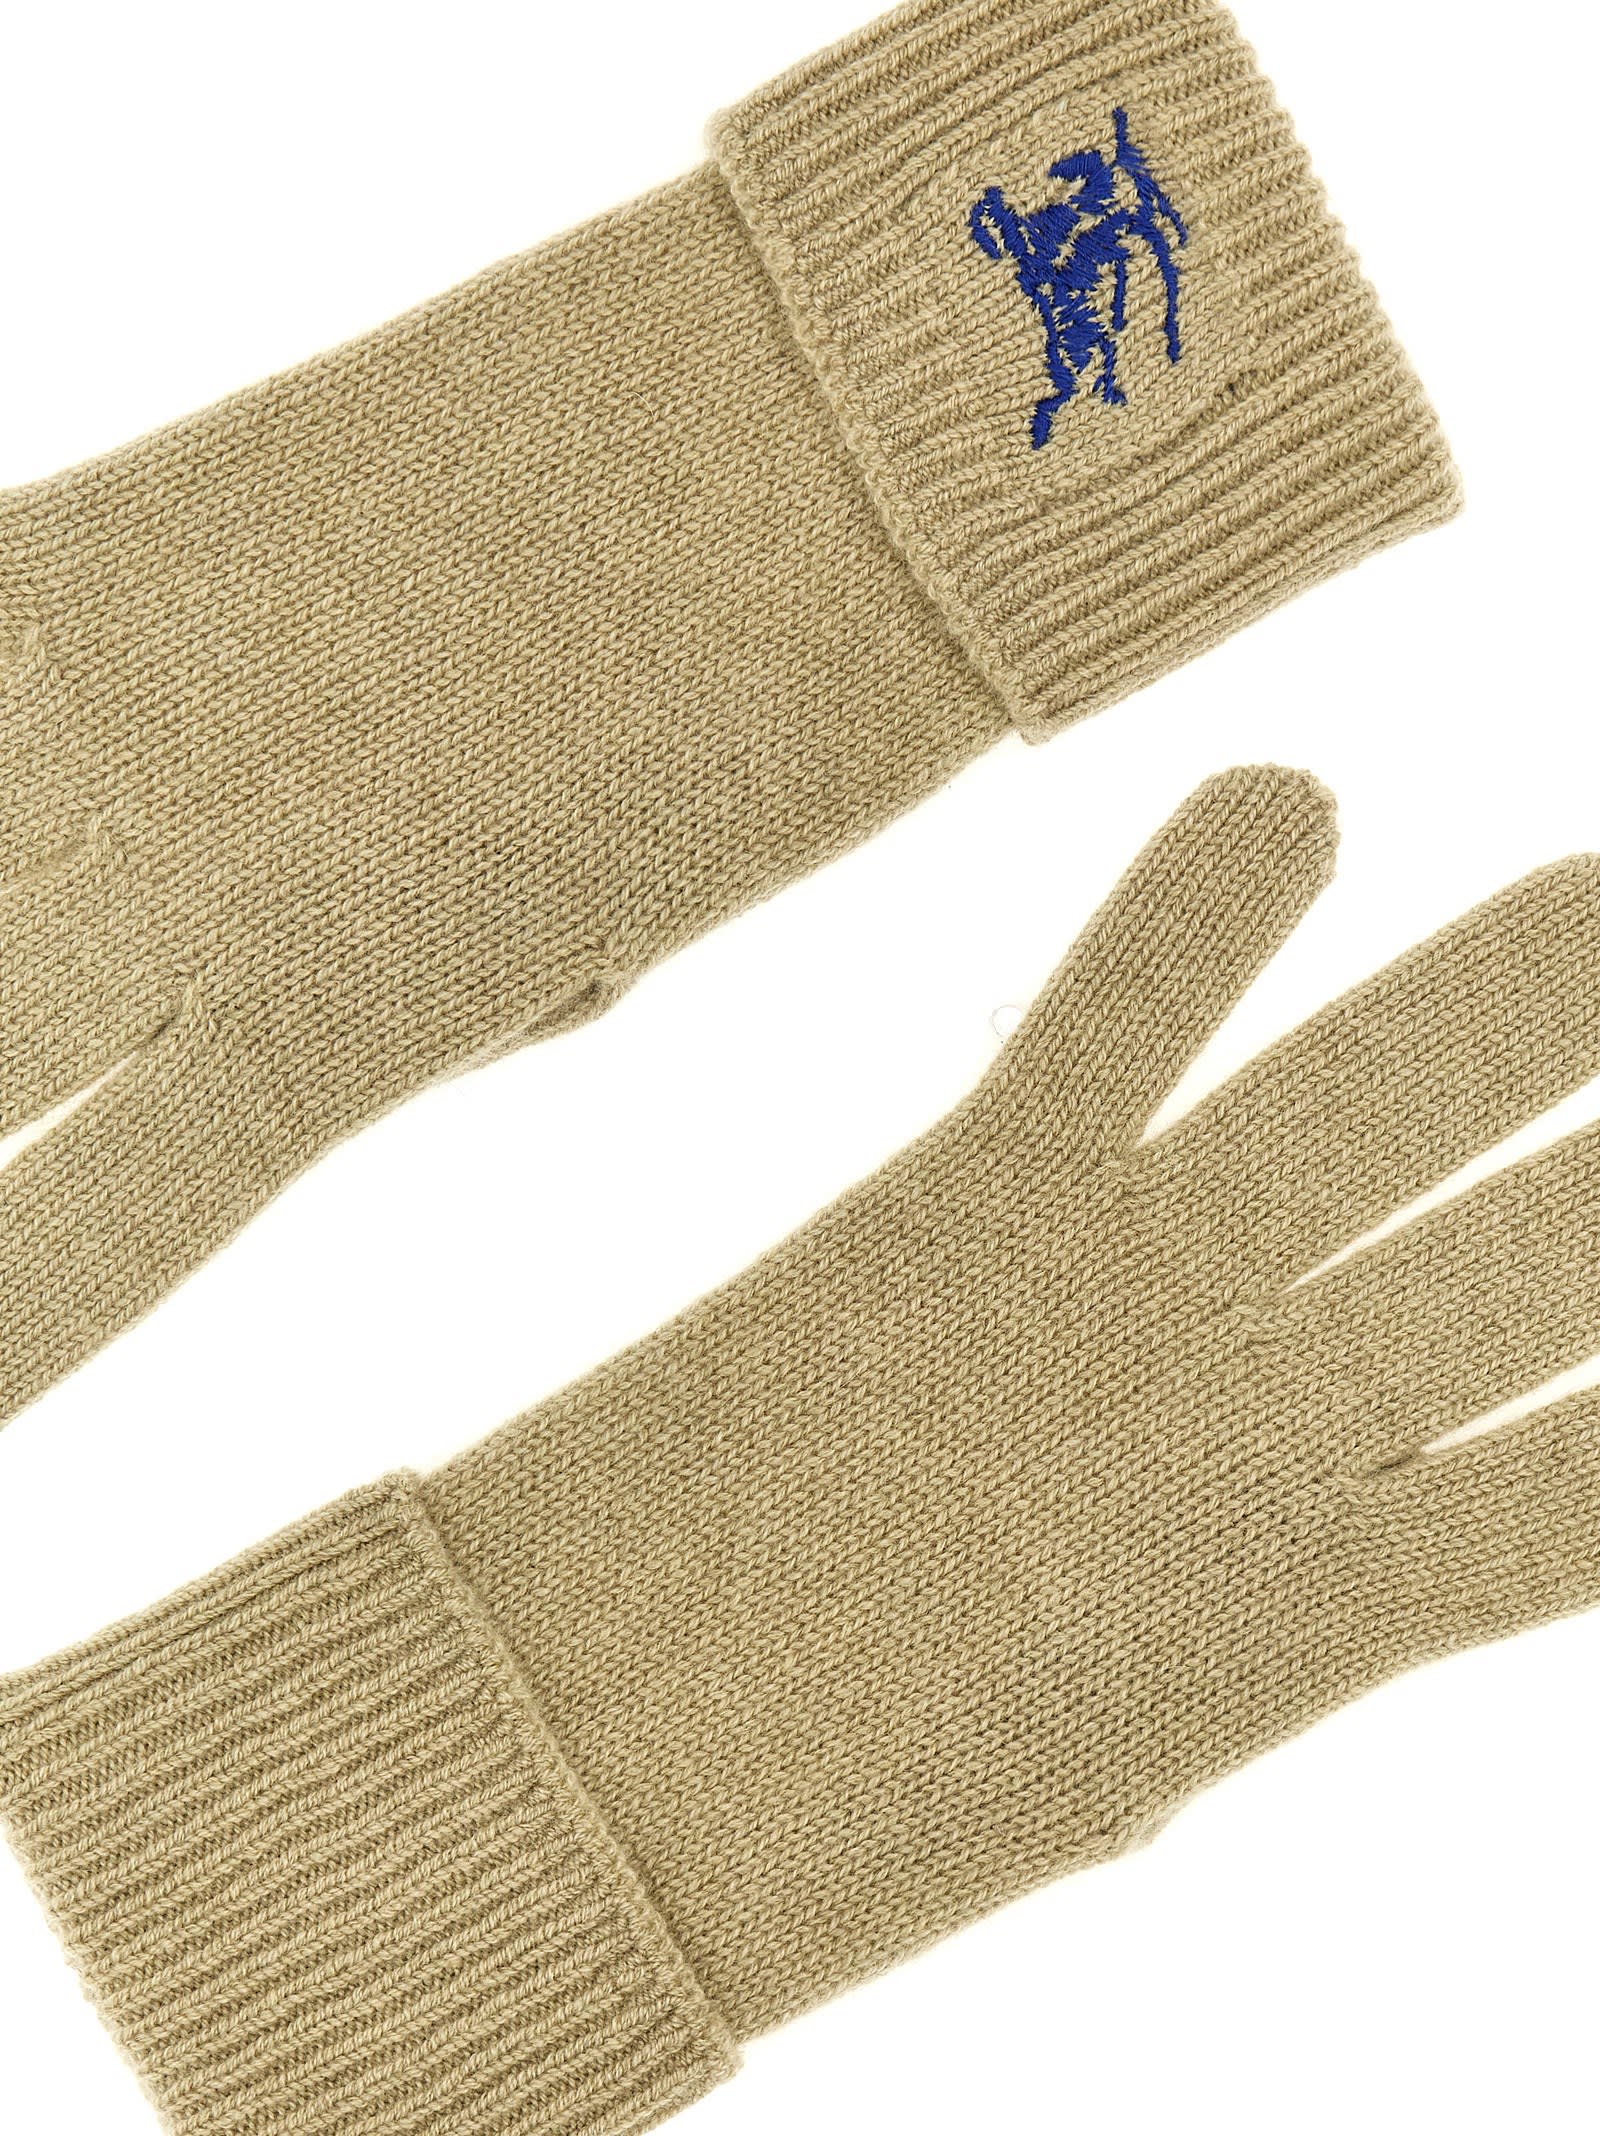 Shop Burberry Equestrian Knight Design Gloves In Green